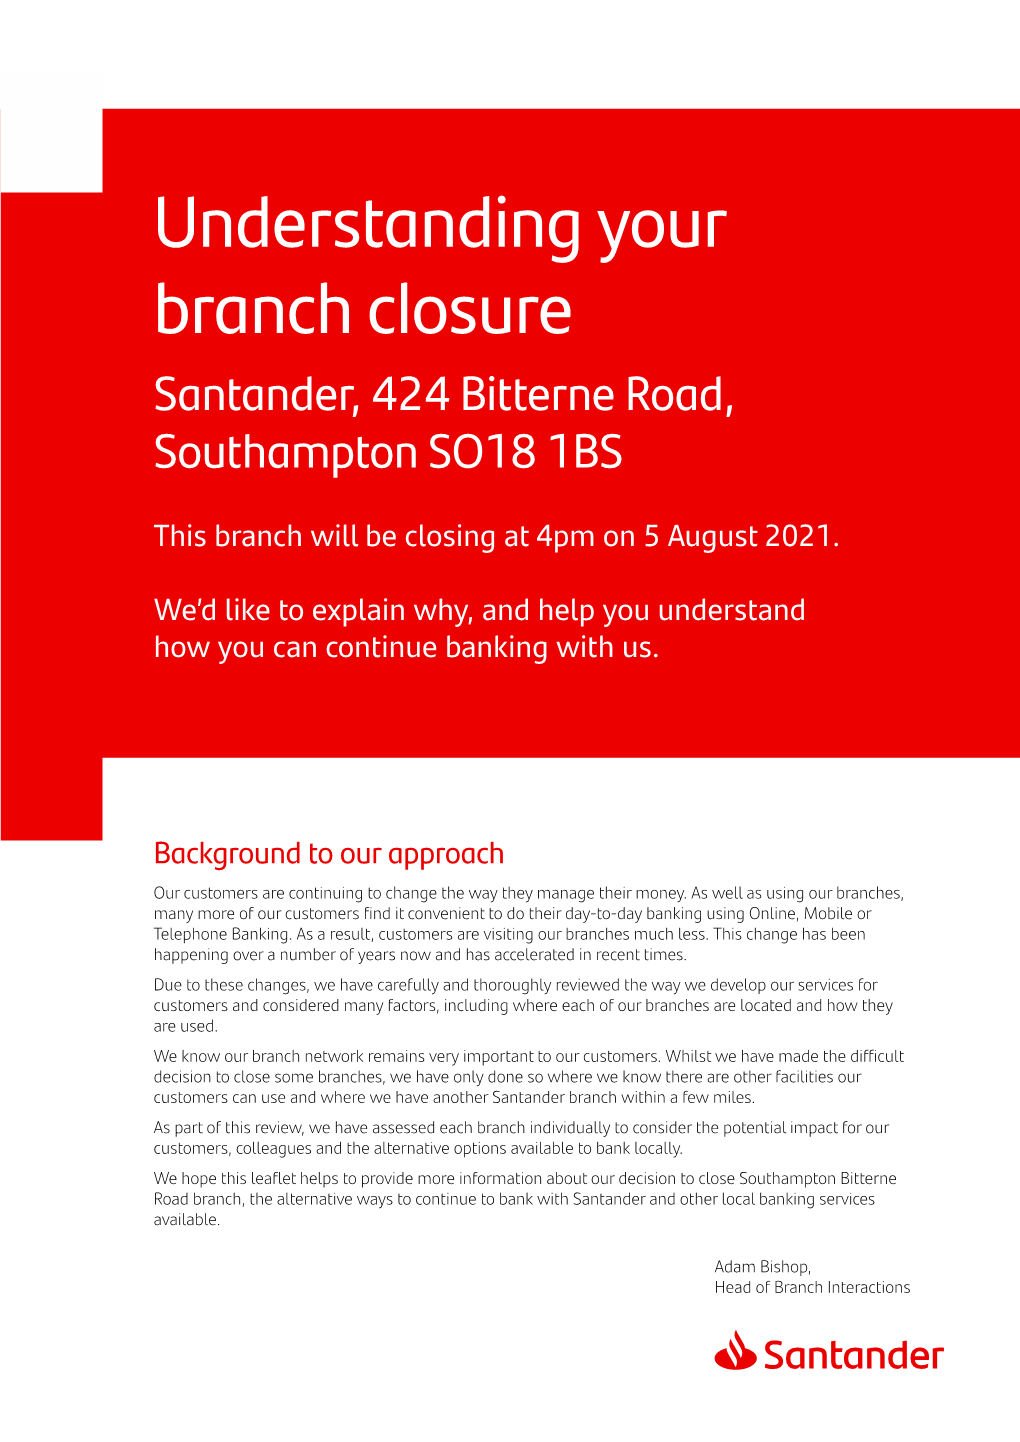 Southampton Bitterne Road Branch, the Alternative Ways to Continue to Bank with Santander and Other Local Banking Services Available